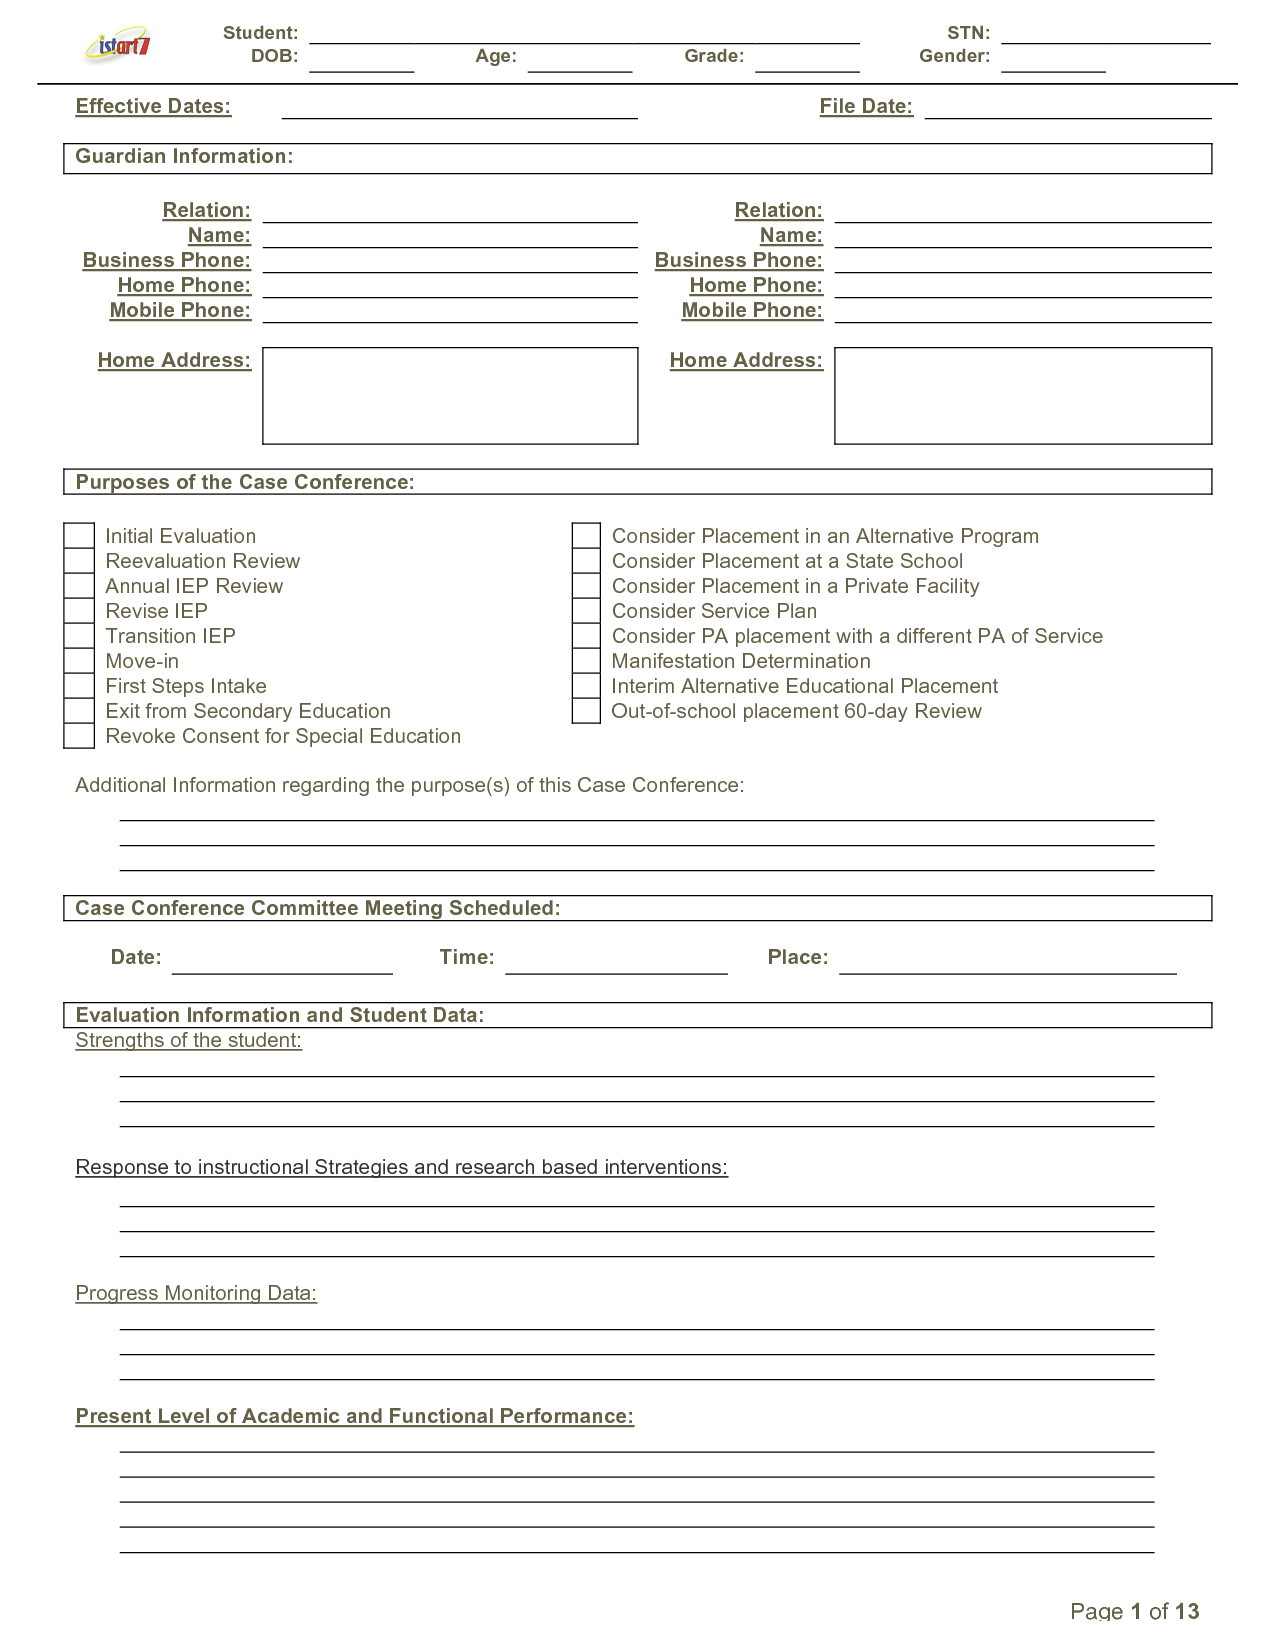 Blank Iep Form Template - Template Intended For Blank Iep Template